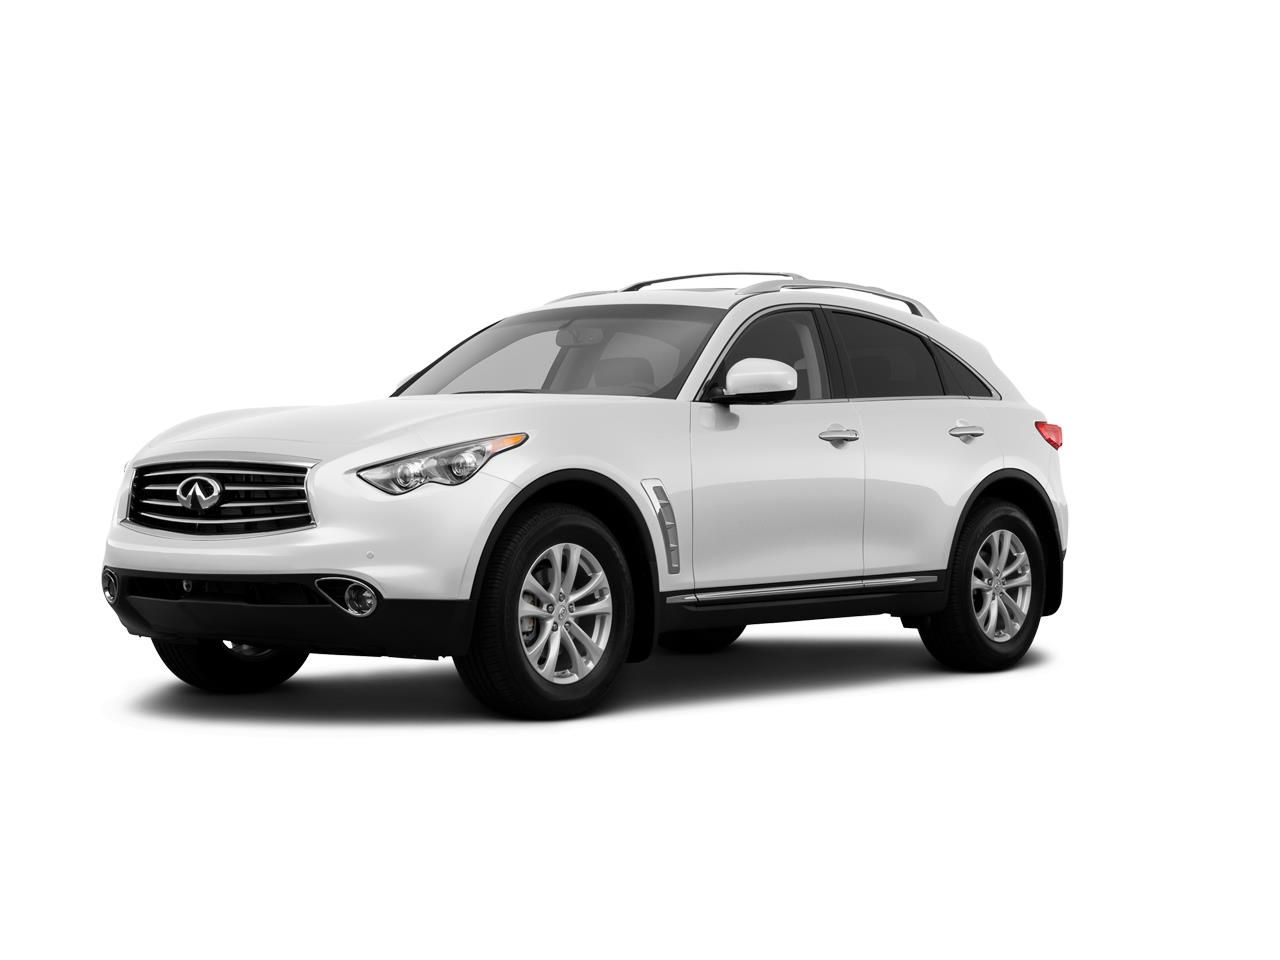 2013 Infiniti FX37 Research, Photos, Specs and Expertise | CarMax